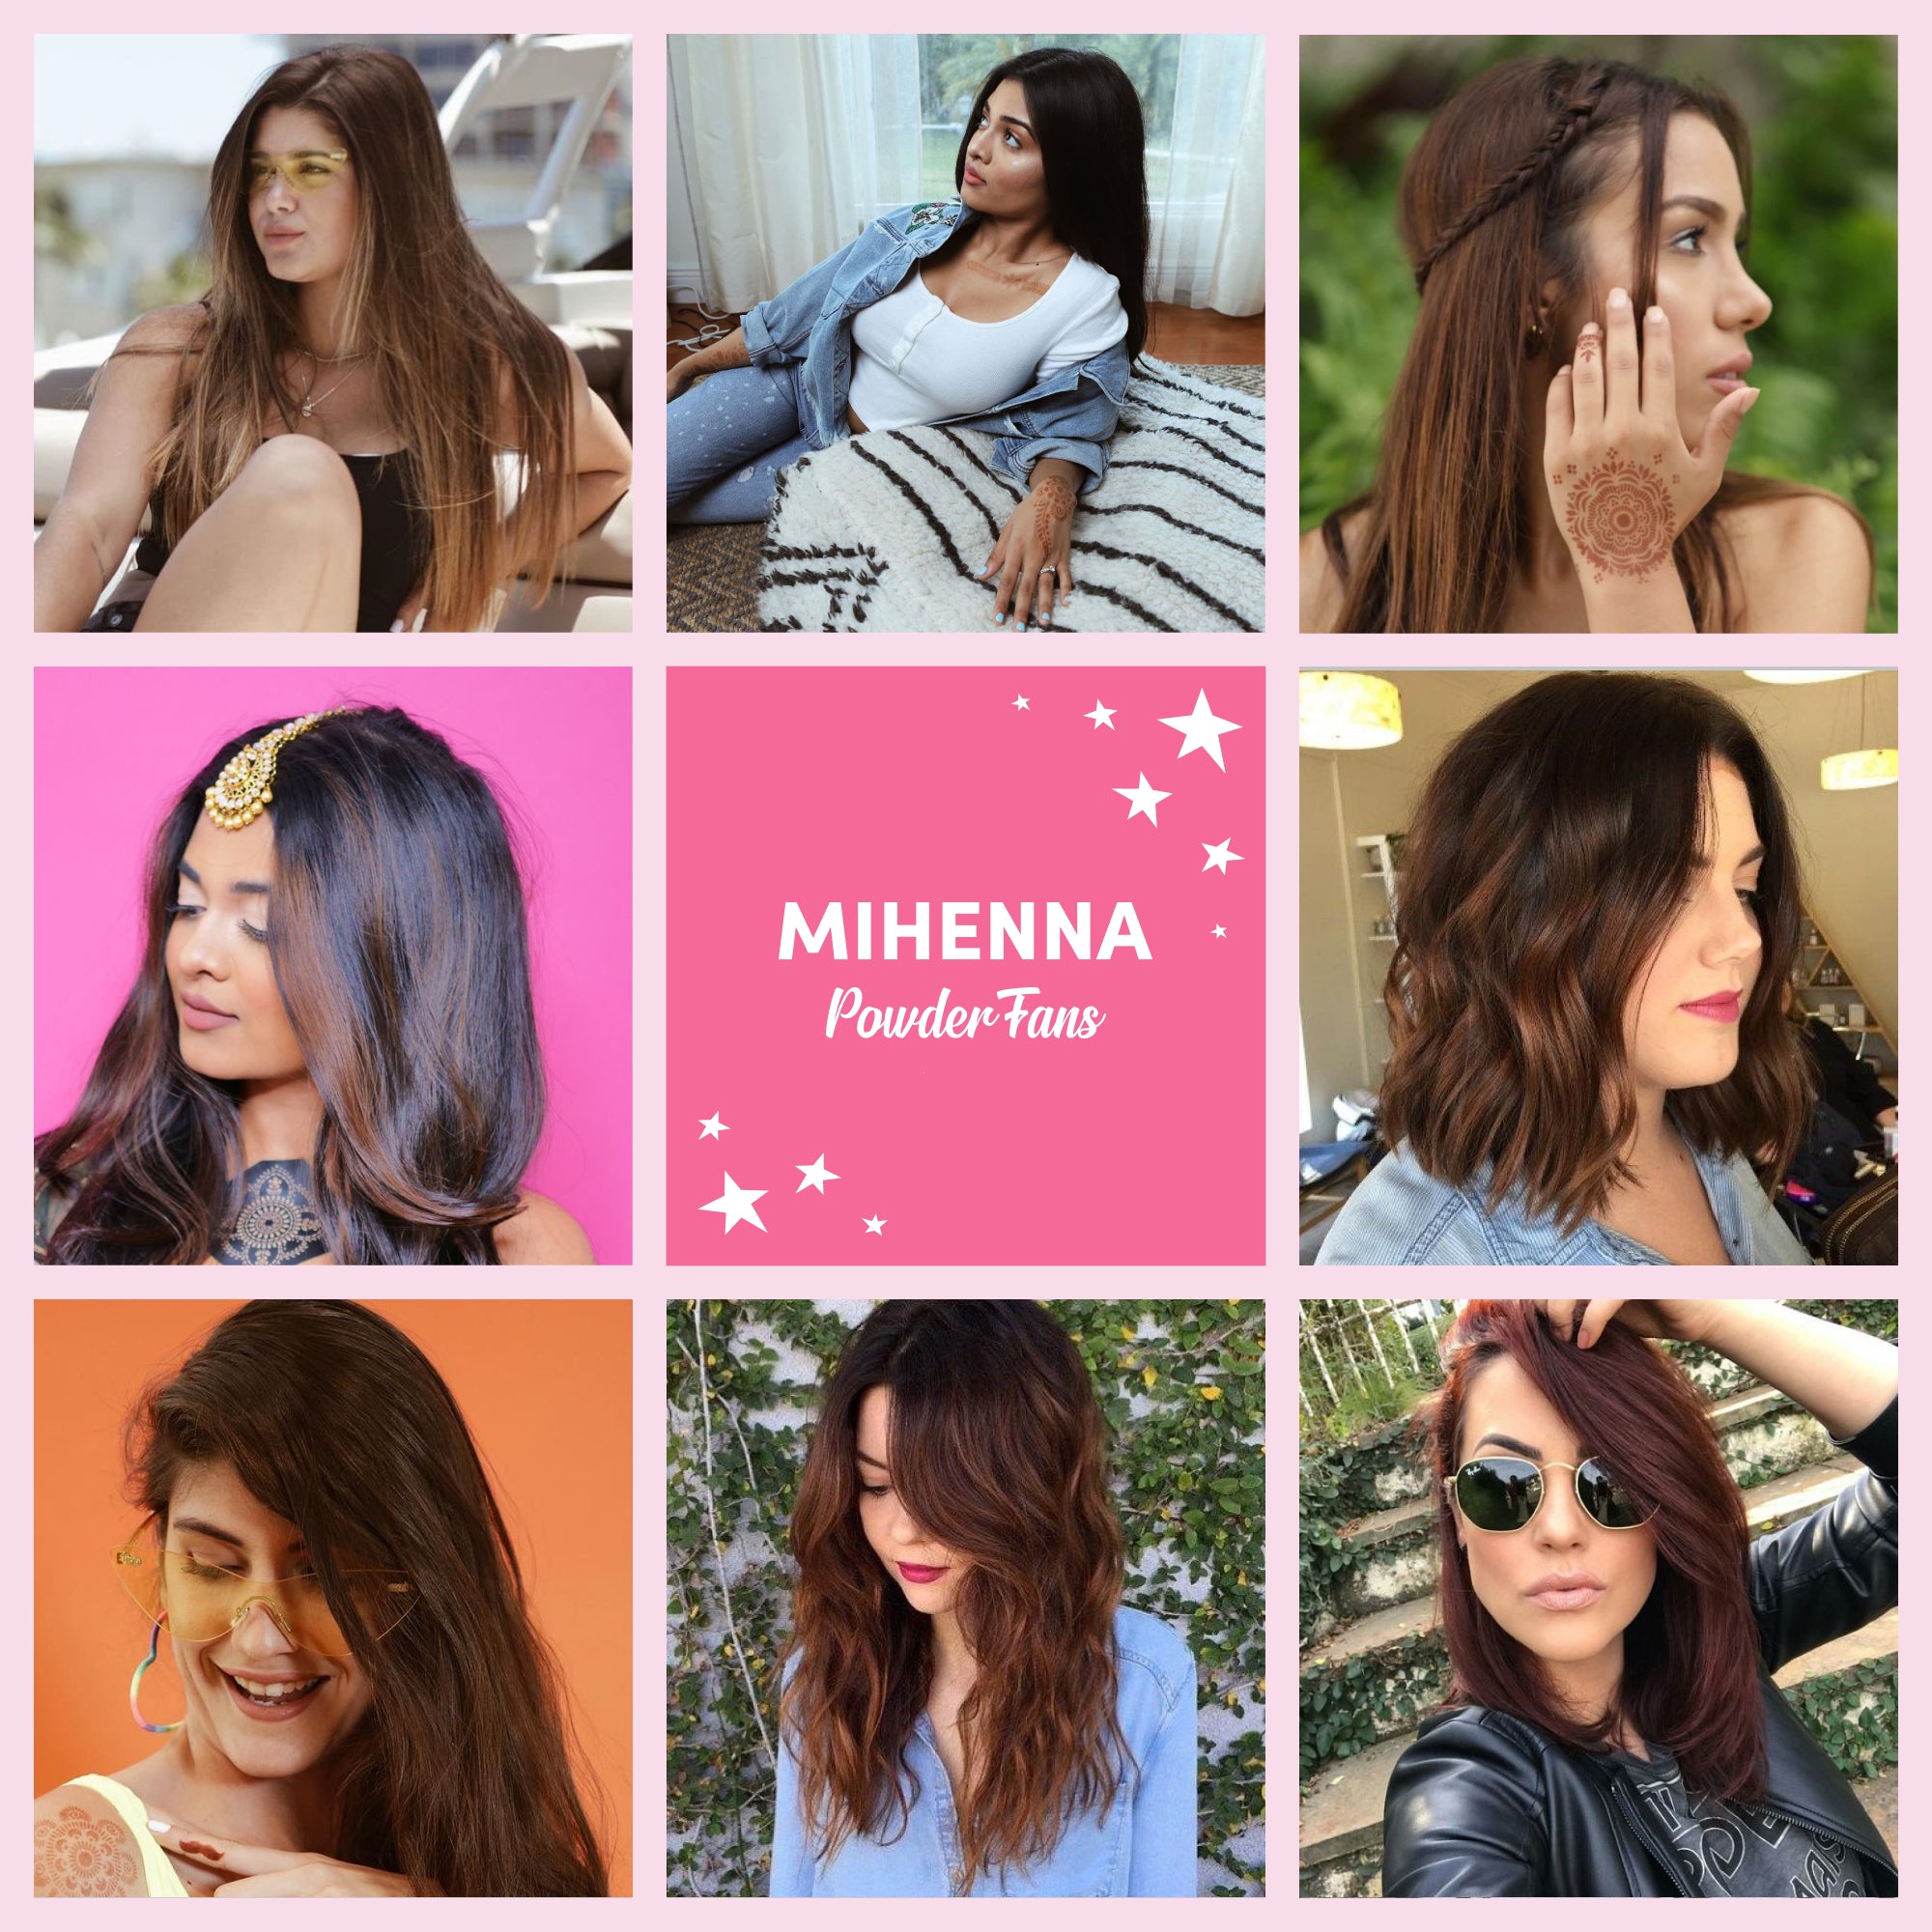 Image text: Mihenna powder fans. Image description: collage of young women showing off henna-dyed hair.